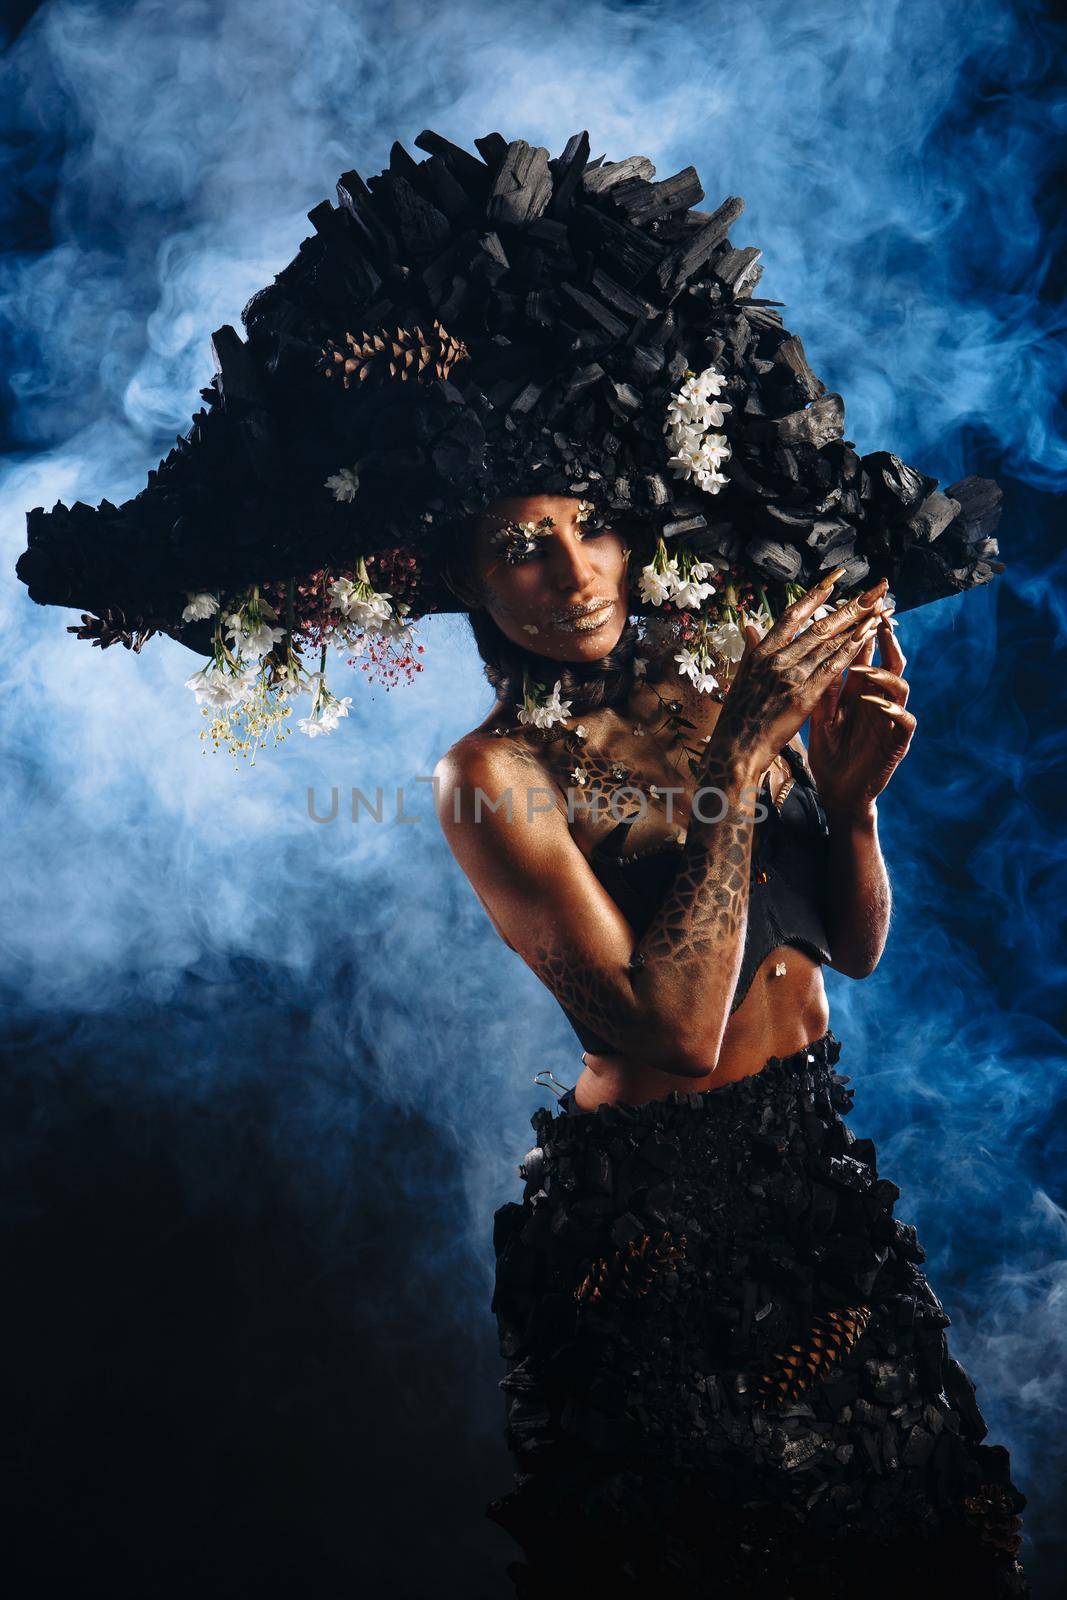 Portrait of a model in a headdress and dress made of coal. There is blue smoke behind the model.